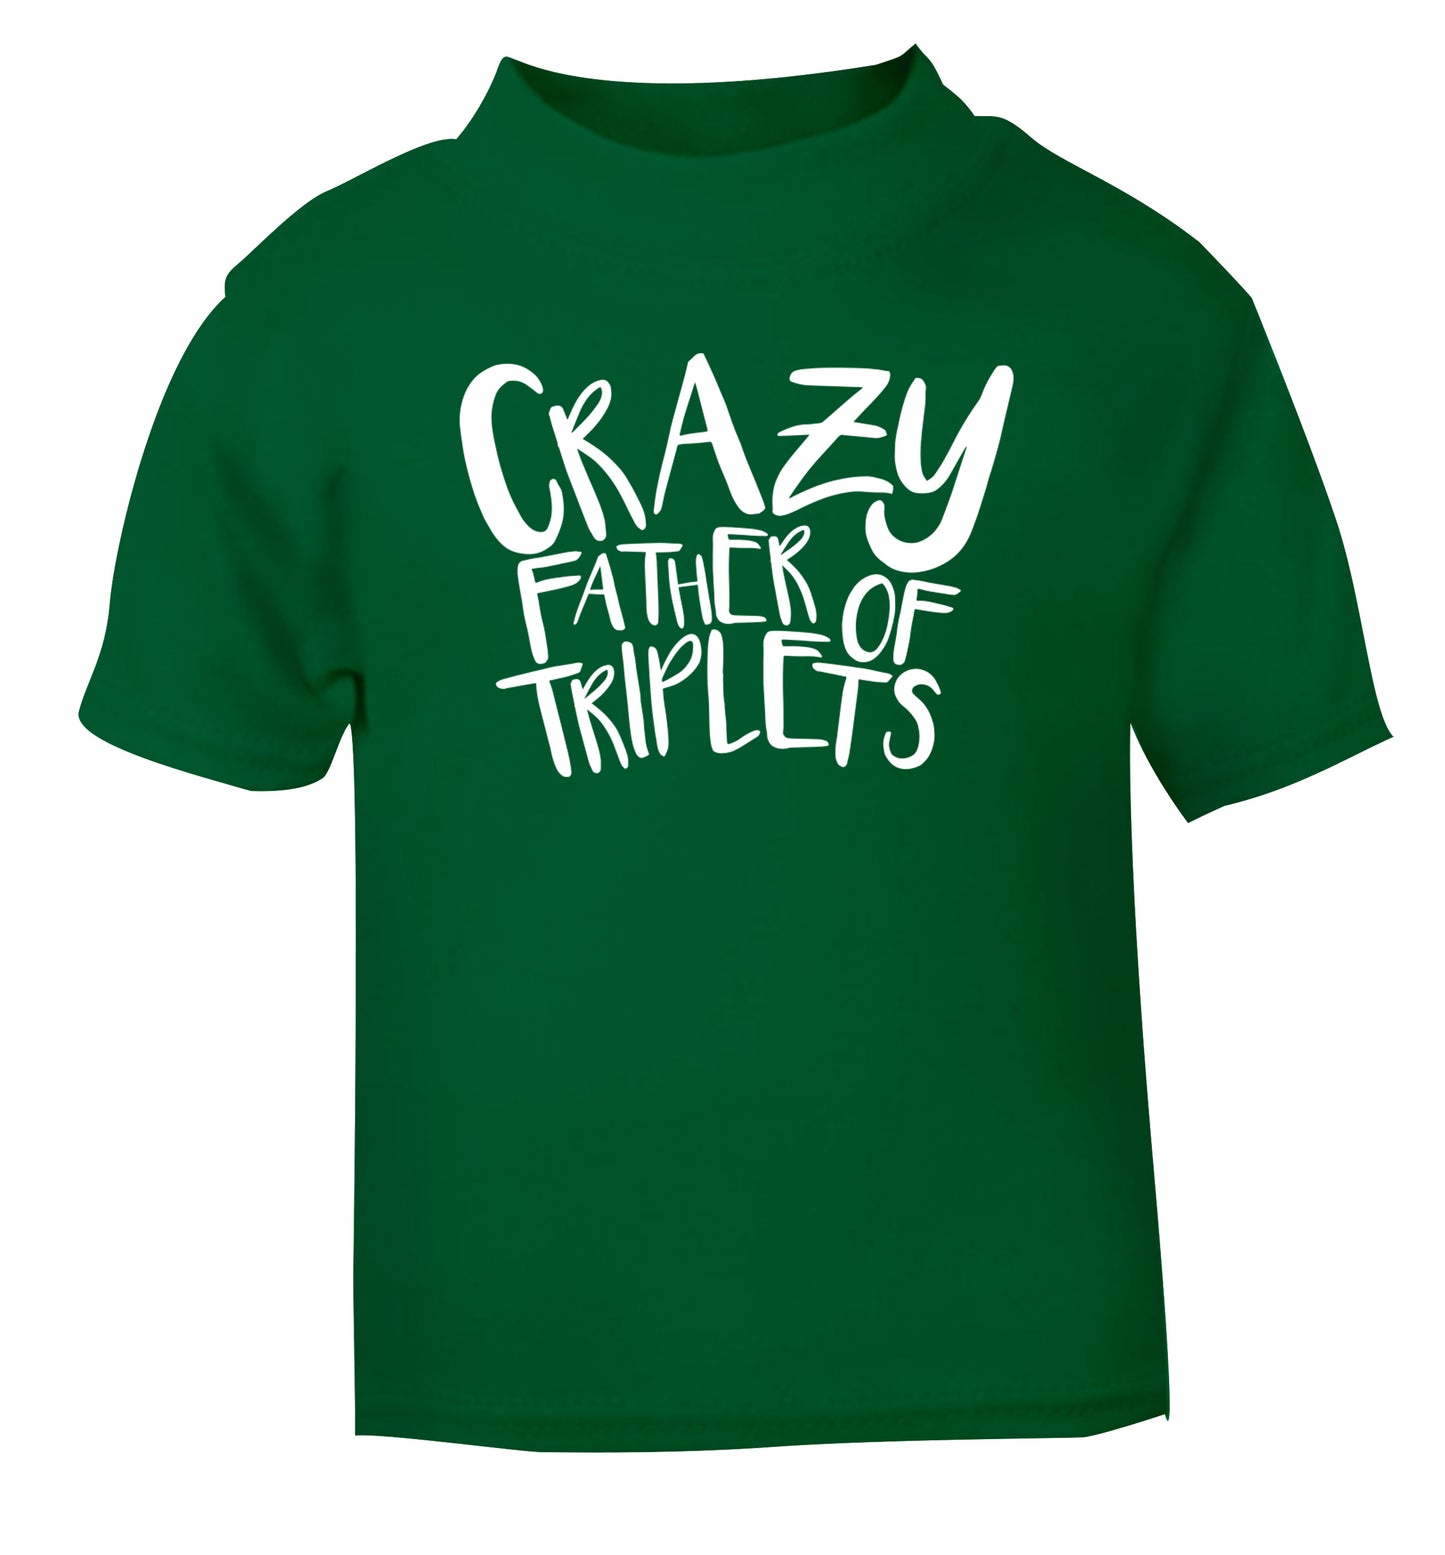 Crazy father of triplets green Baby Toddler Tshirt 2 Years